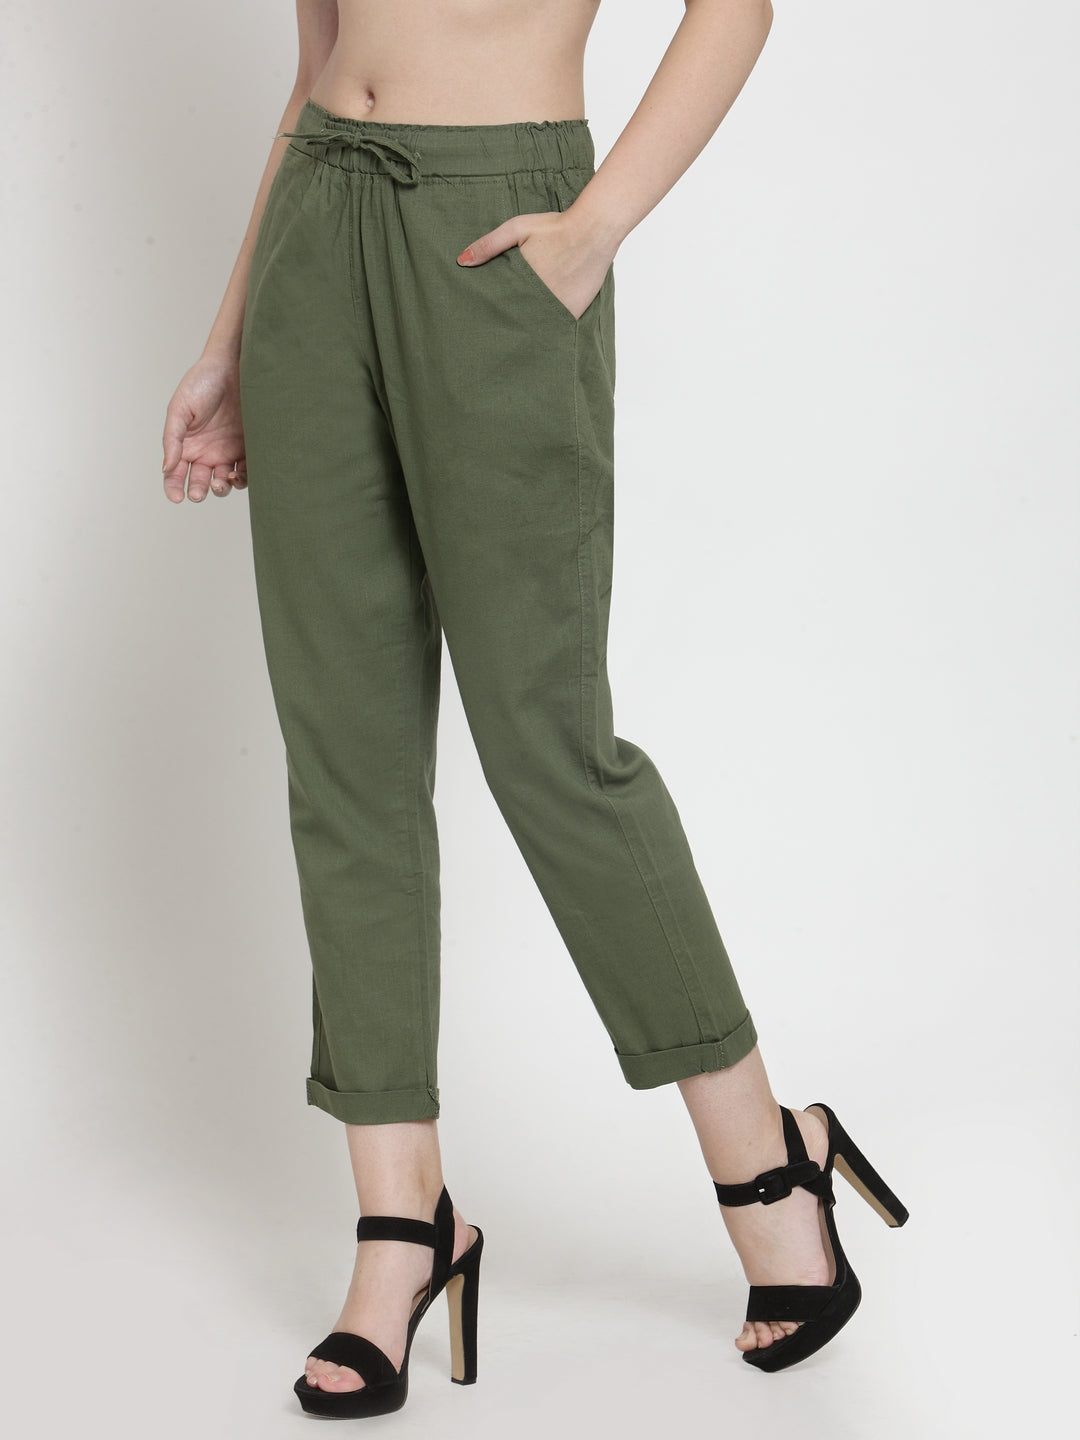 Women Olive Green Narrow-Fit Ankle Length Cotton Lower With Pockets